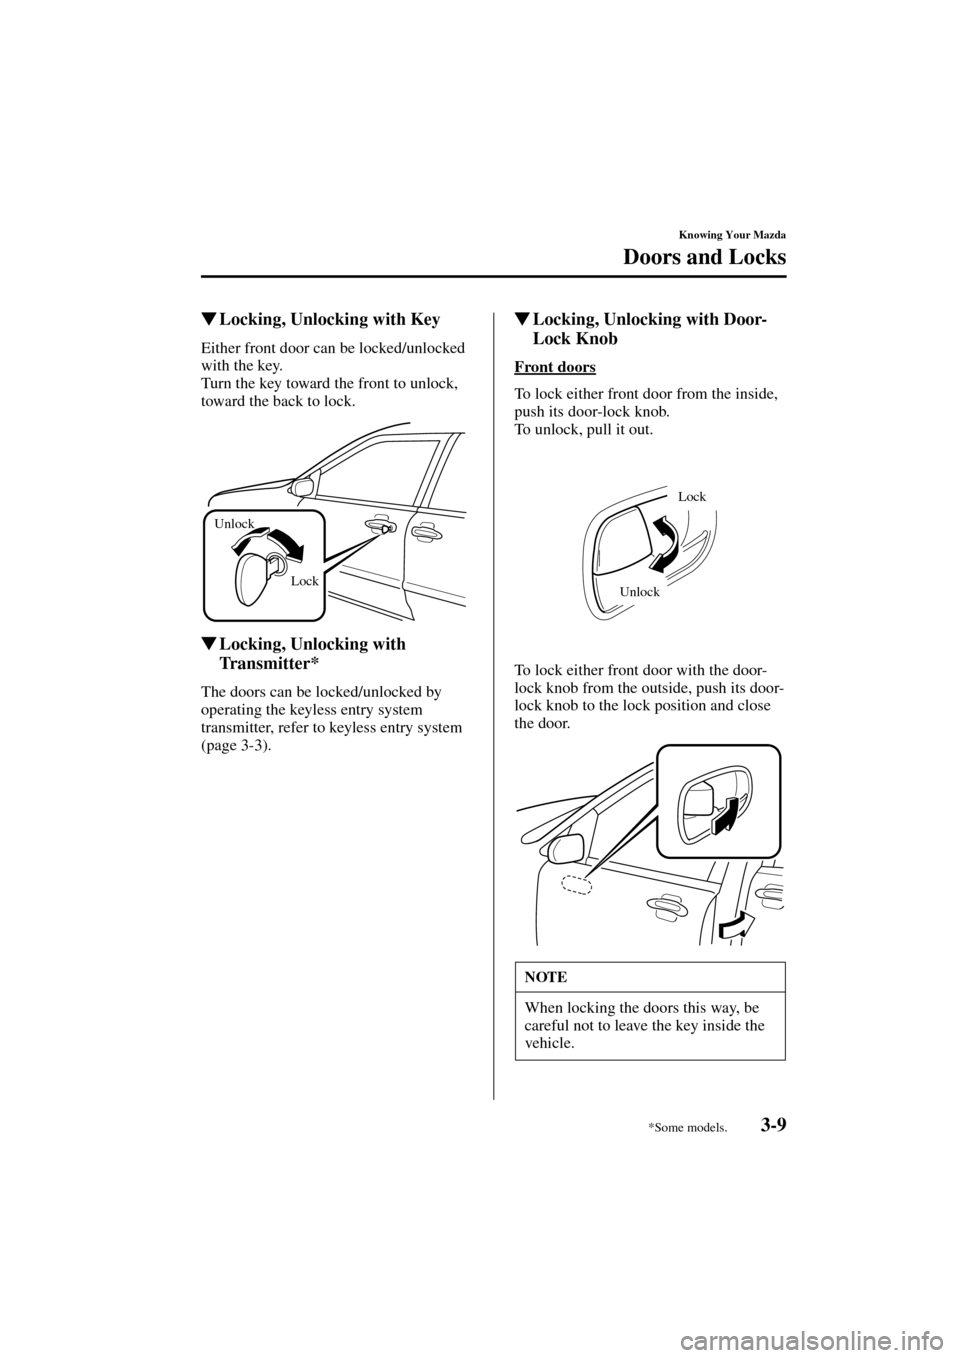 MAZDA MODEL MPV 2004  Owners Manual (in English) 3-9
Knowing Your Mazda
Doors and Locks
Form No. 8S06-EA-03H
Locking, Unlocking with Key
Either front door can be locked/unlocked 
with the key.
Turn the key toward the front to unlock, 
toward the ba